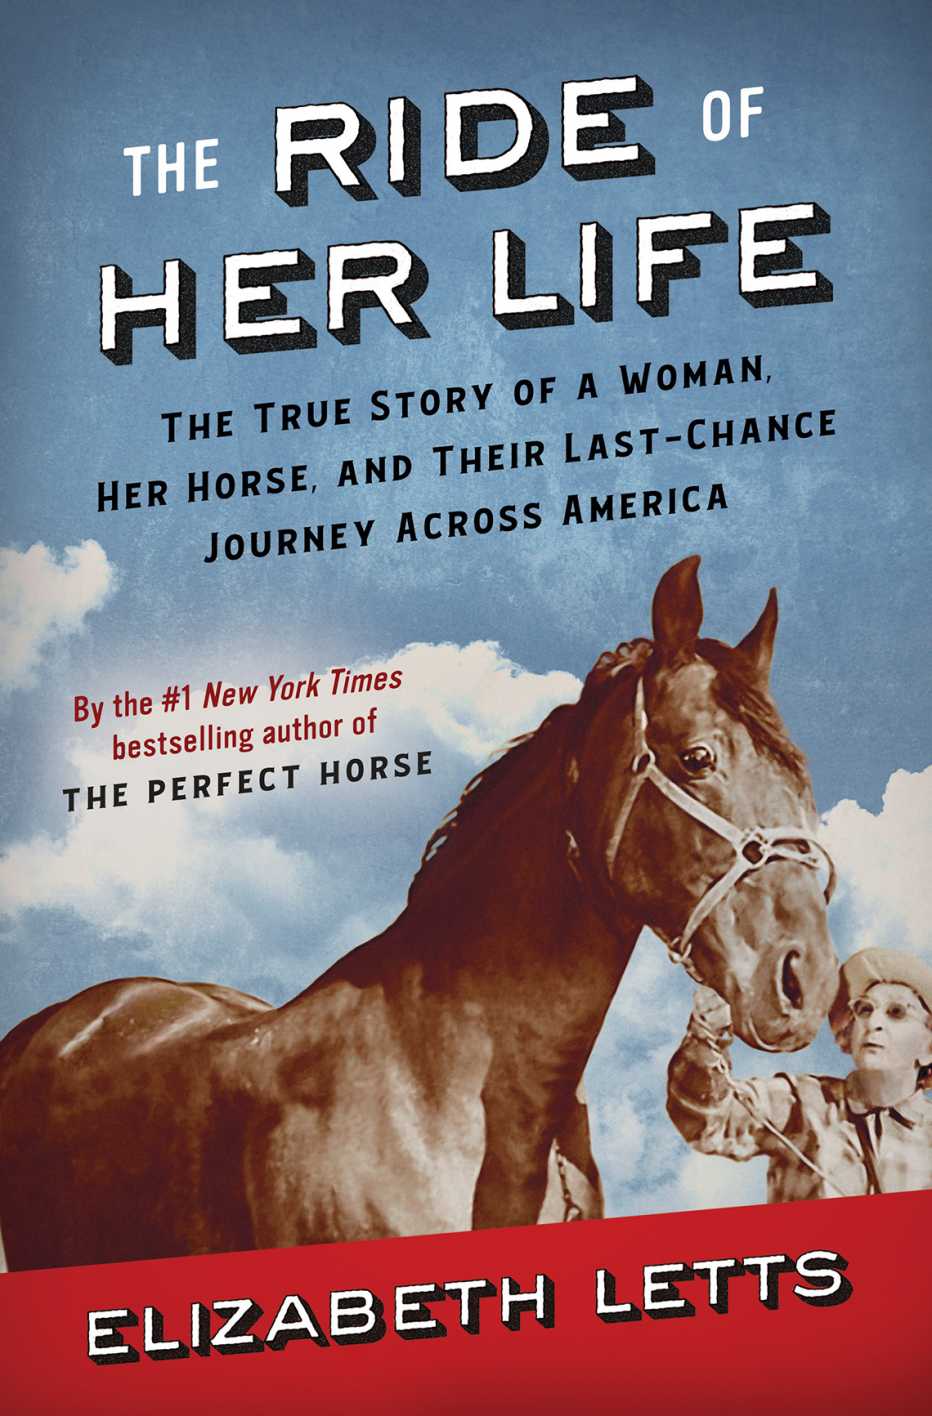 the ride of her life the true story of a woman her horse and their last chance journey across america by elizabeth letts